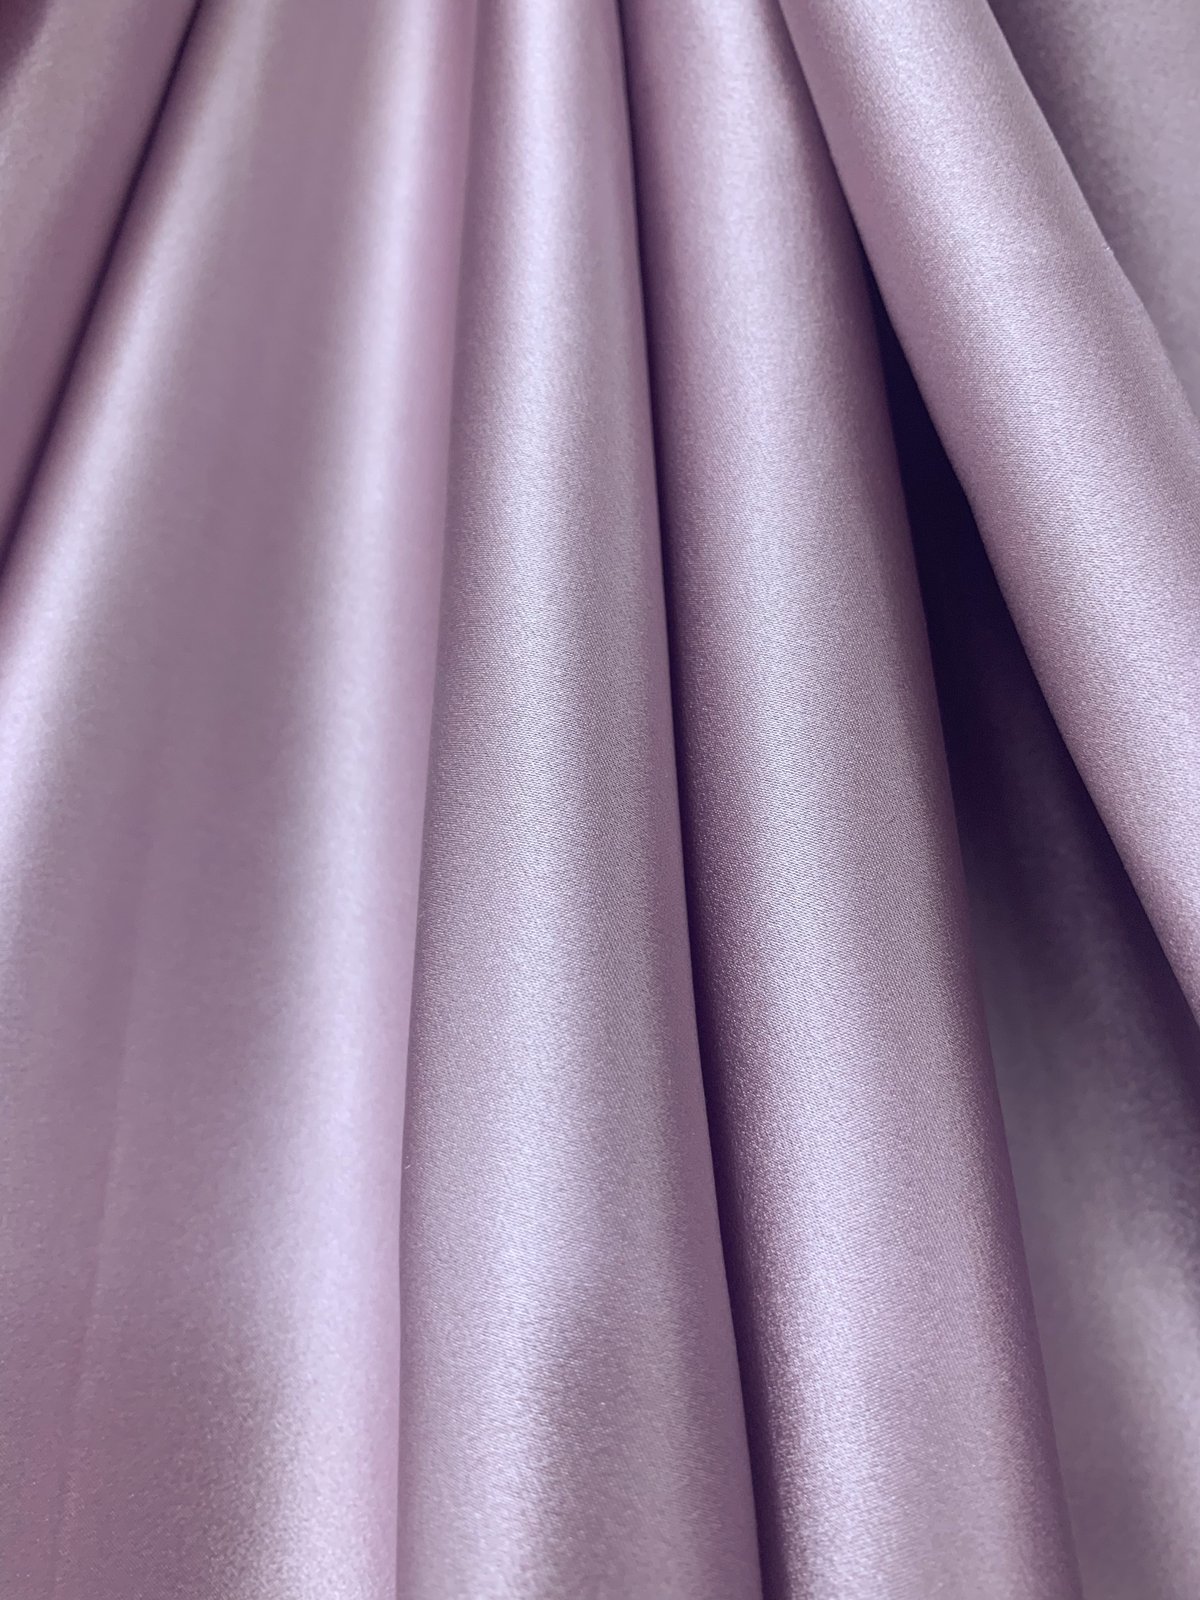 Lilac 100% Pure Mulberry Silk Fabric 19 momme Silk By The Yard